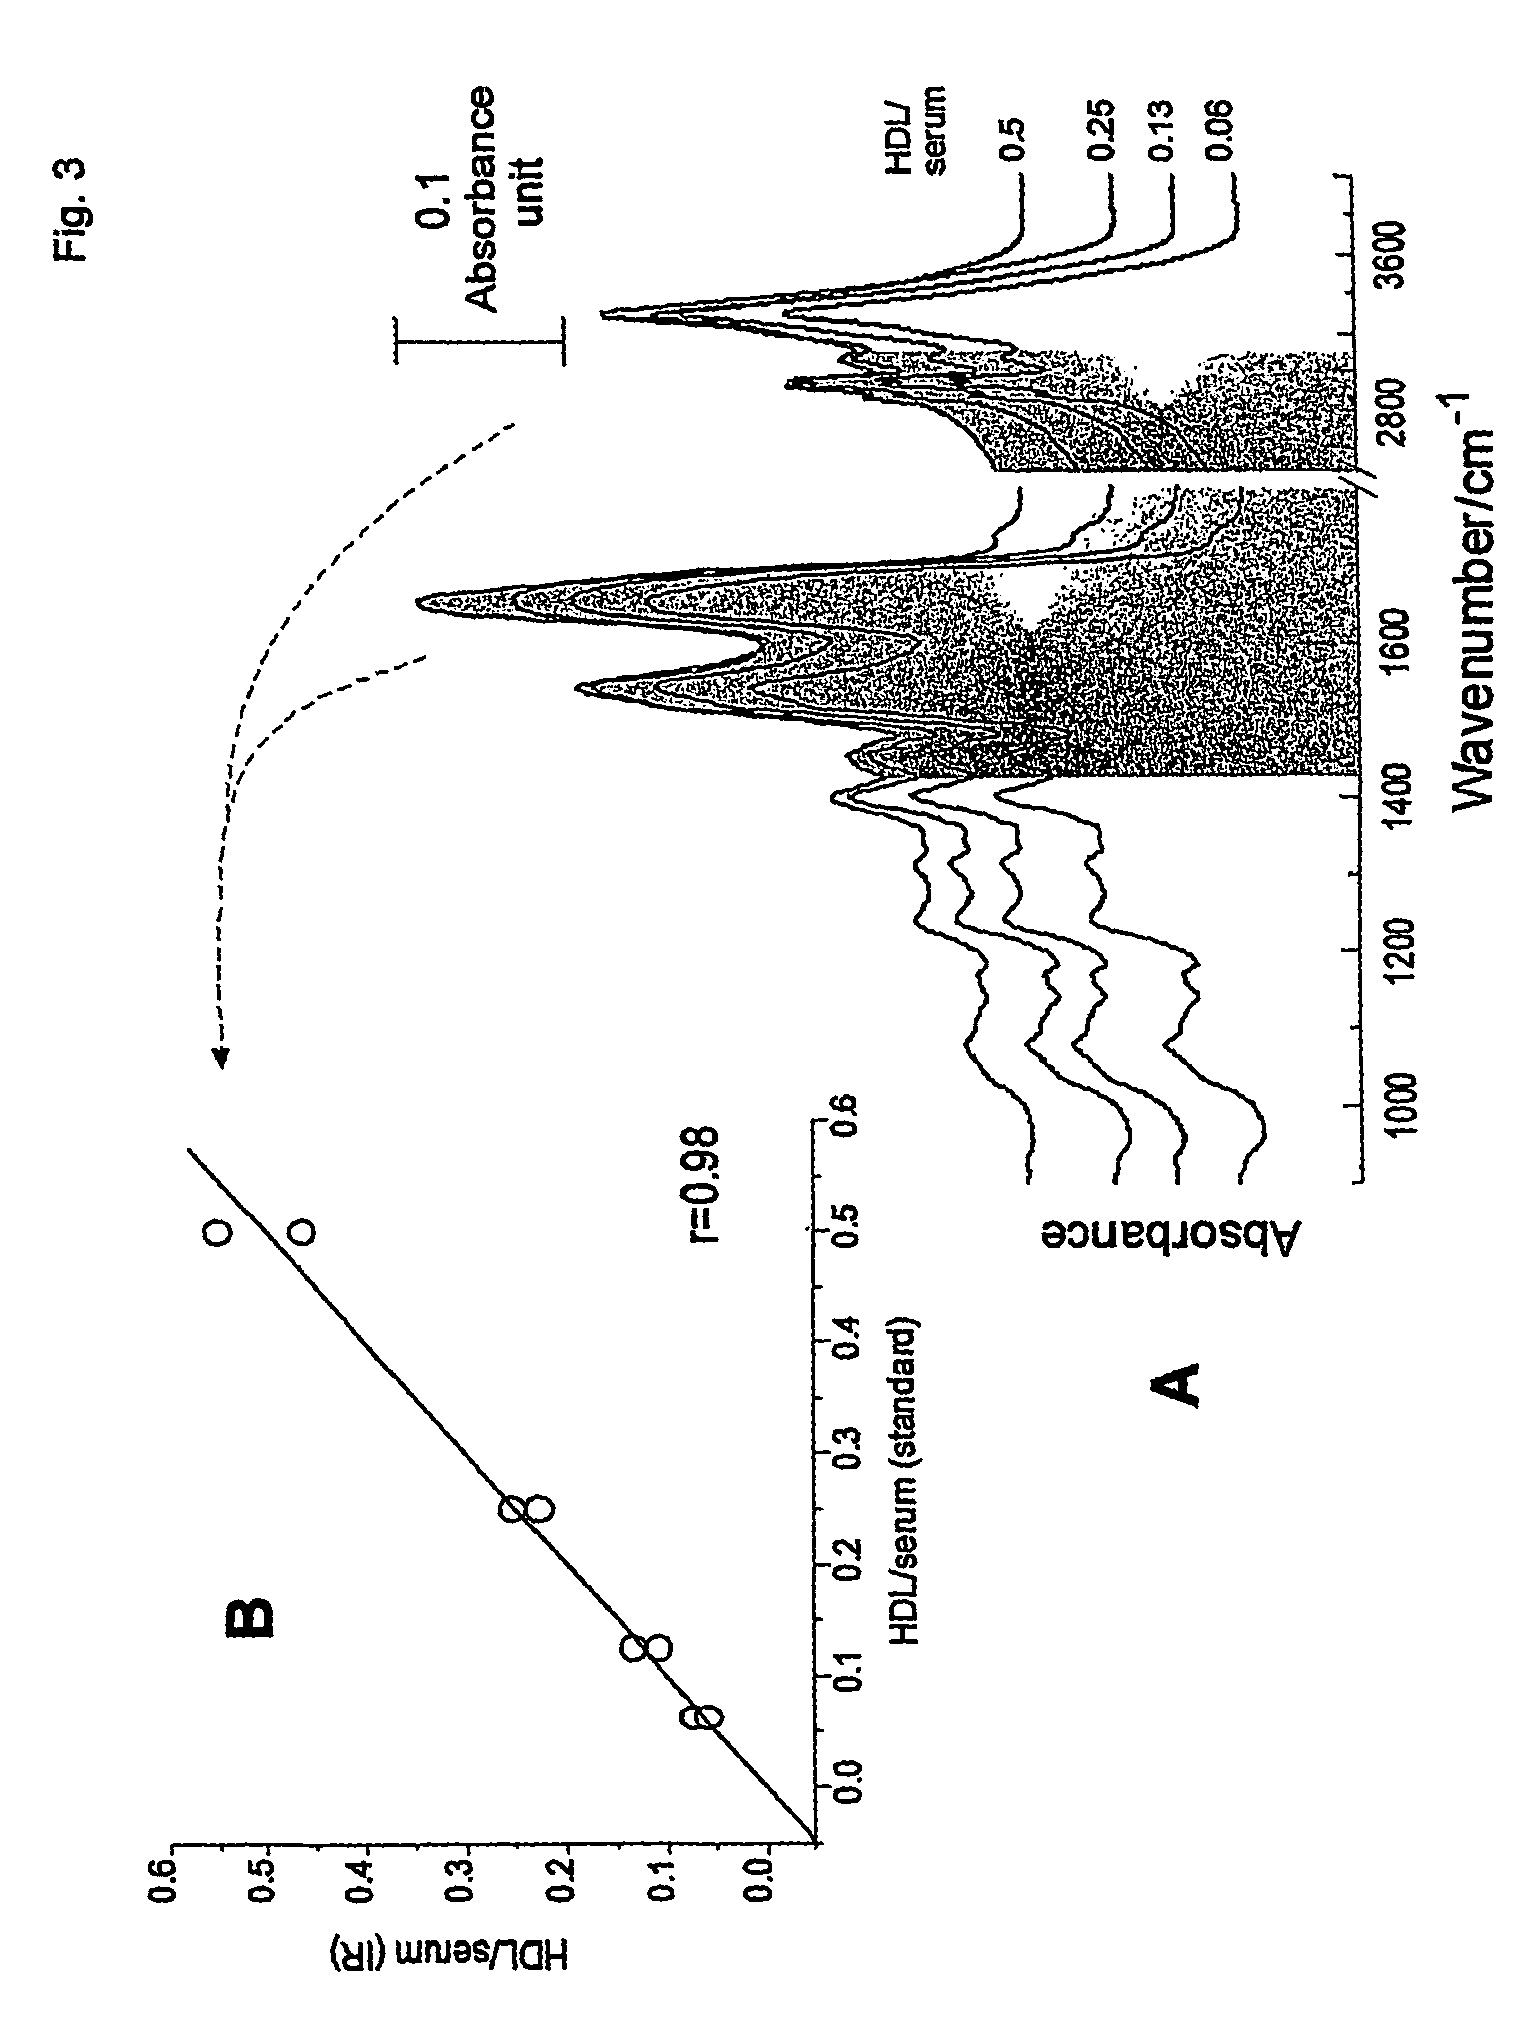 Method for the simultaneous and direct determination of serum cholesterol in high and low density lipoproteins using infrared spectroscopy